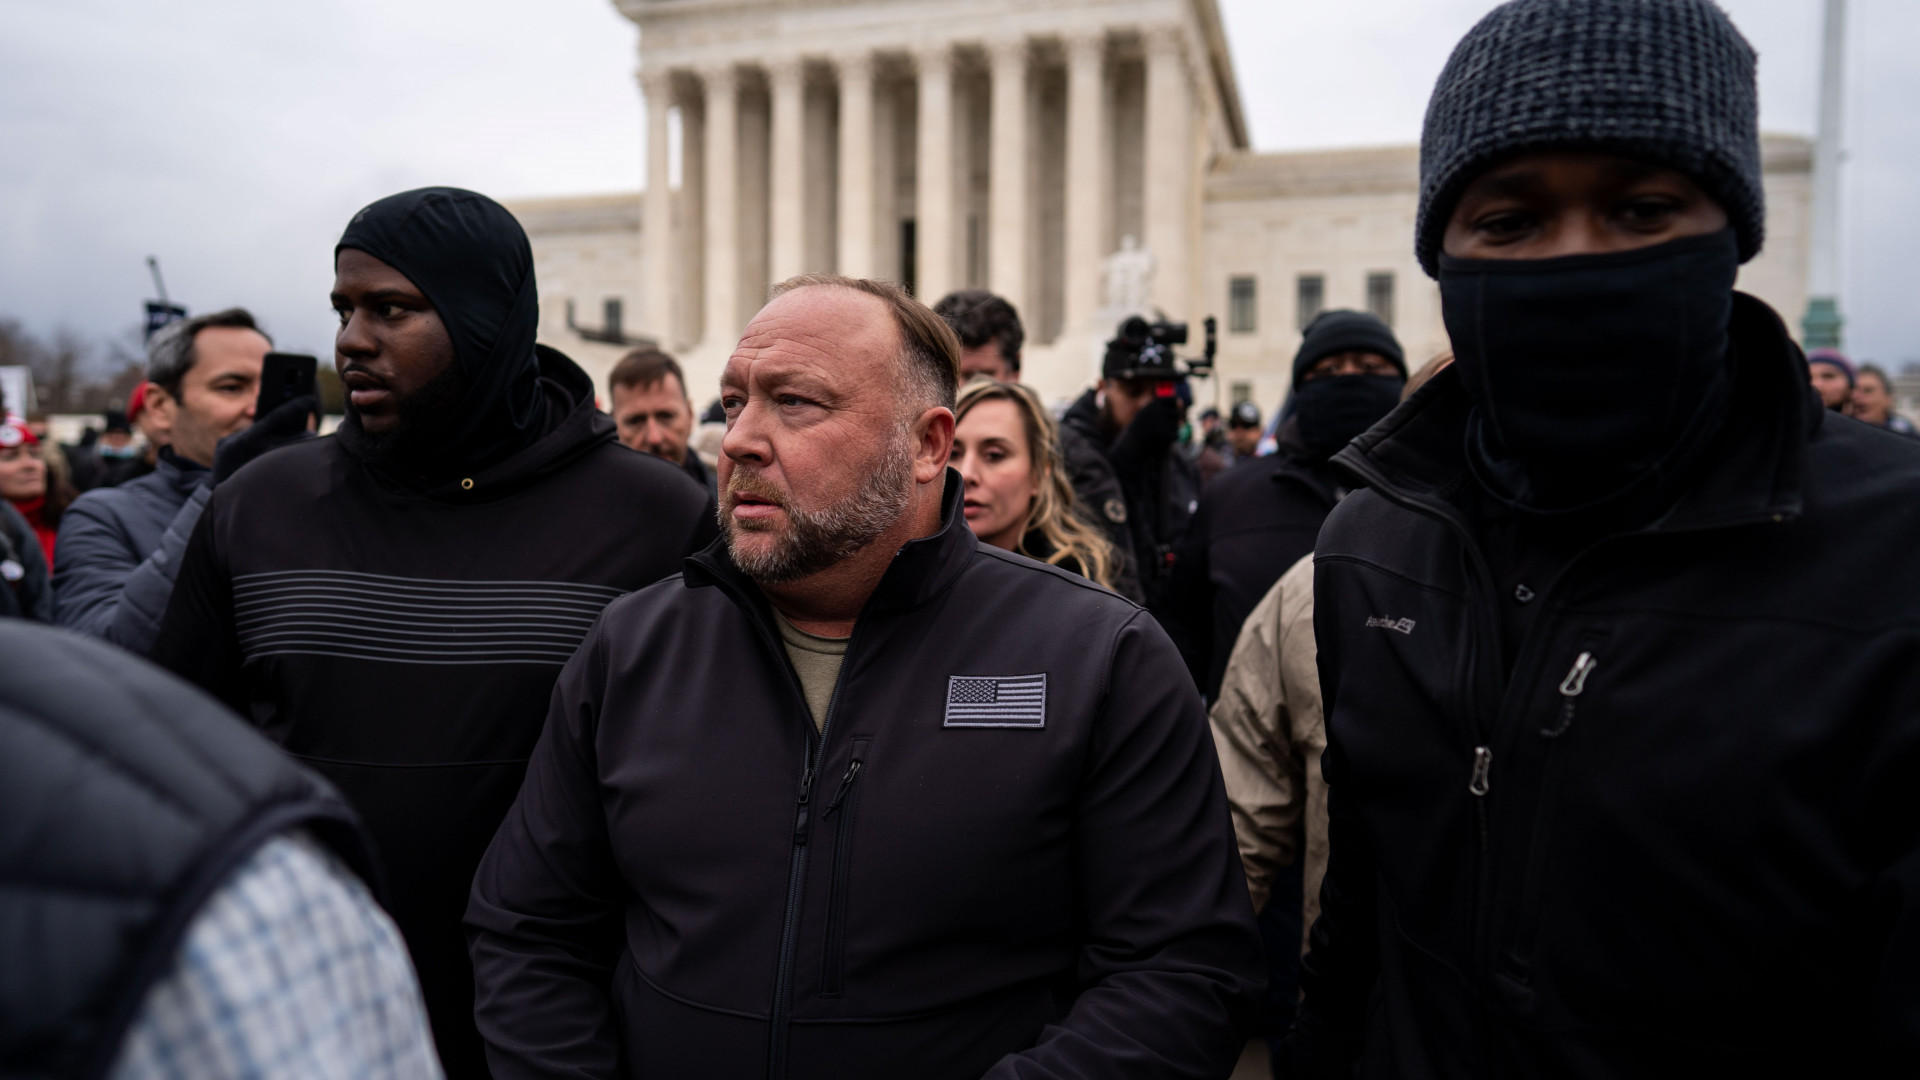 Store chain heiress and Alex Jones funded a demonstration that led to the blockade of the Capitol